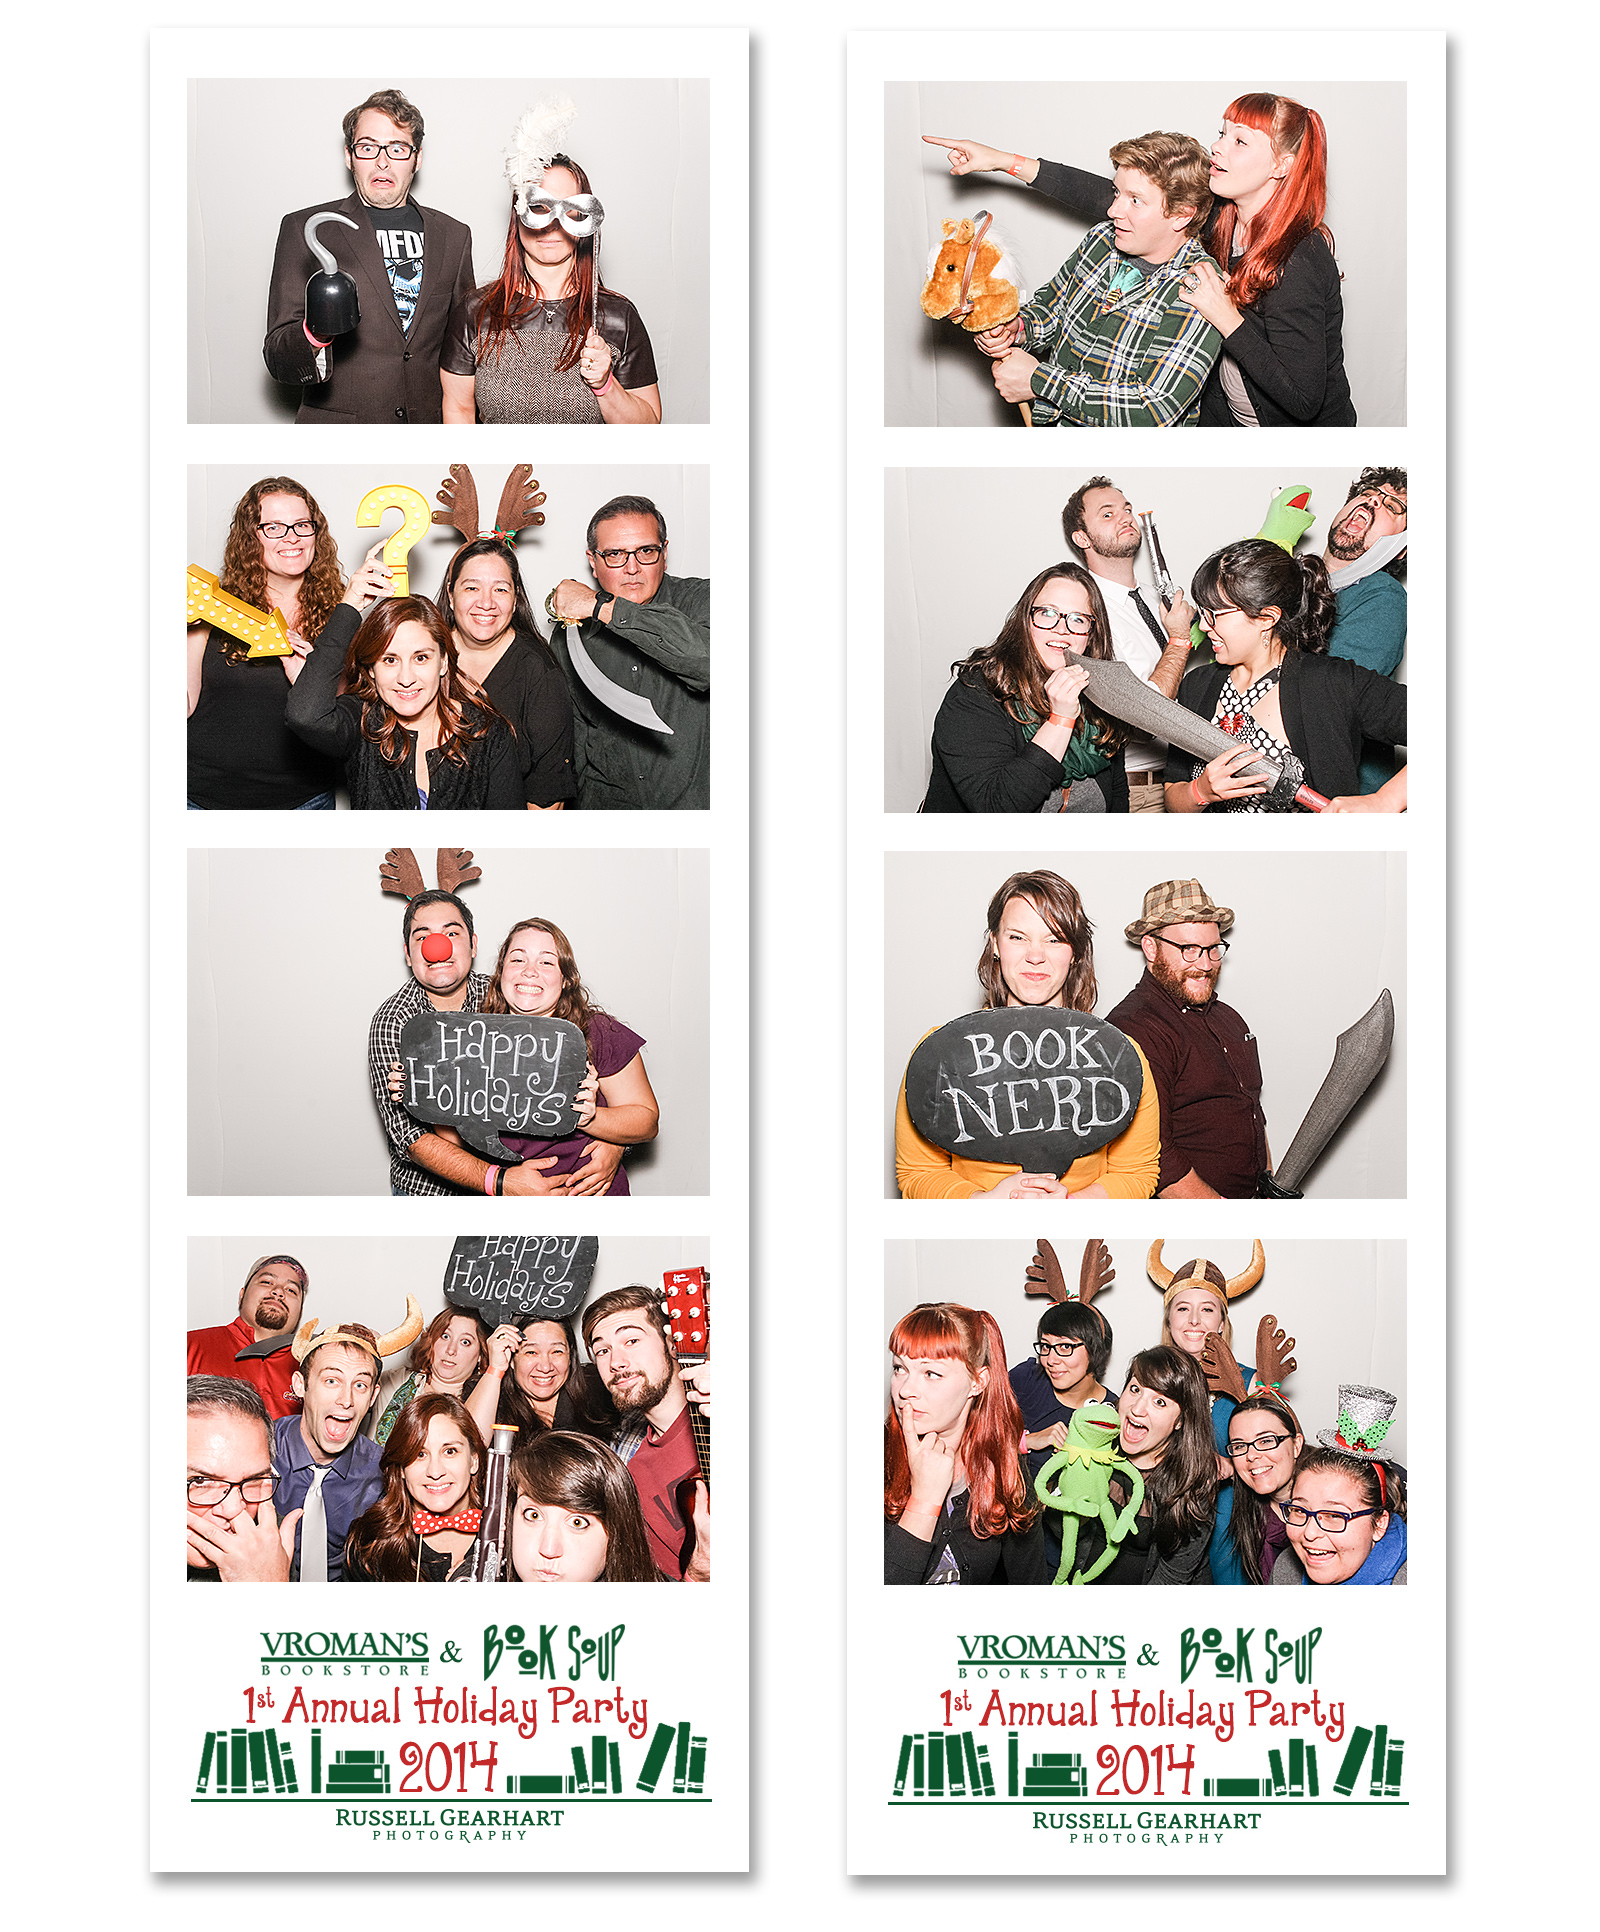 Pasadena Photobooth: Vroman’s Holiday Party 2014 – Russell Gearhart Photography – www.gearhartphoto.com